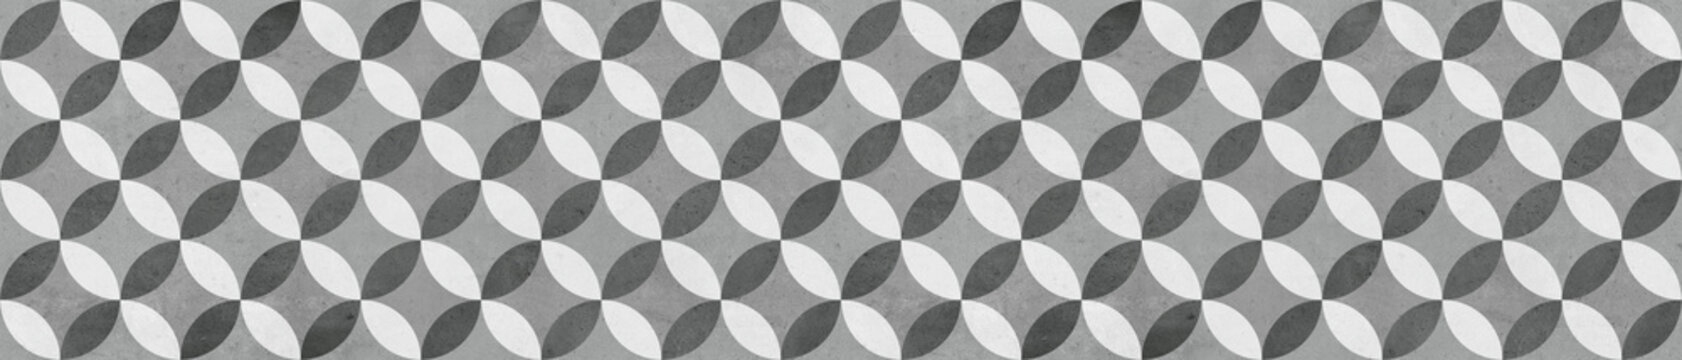 gray geometric seamless pattern, repeating background